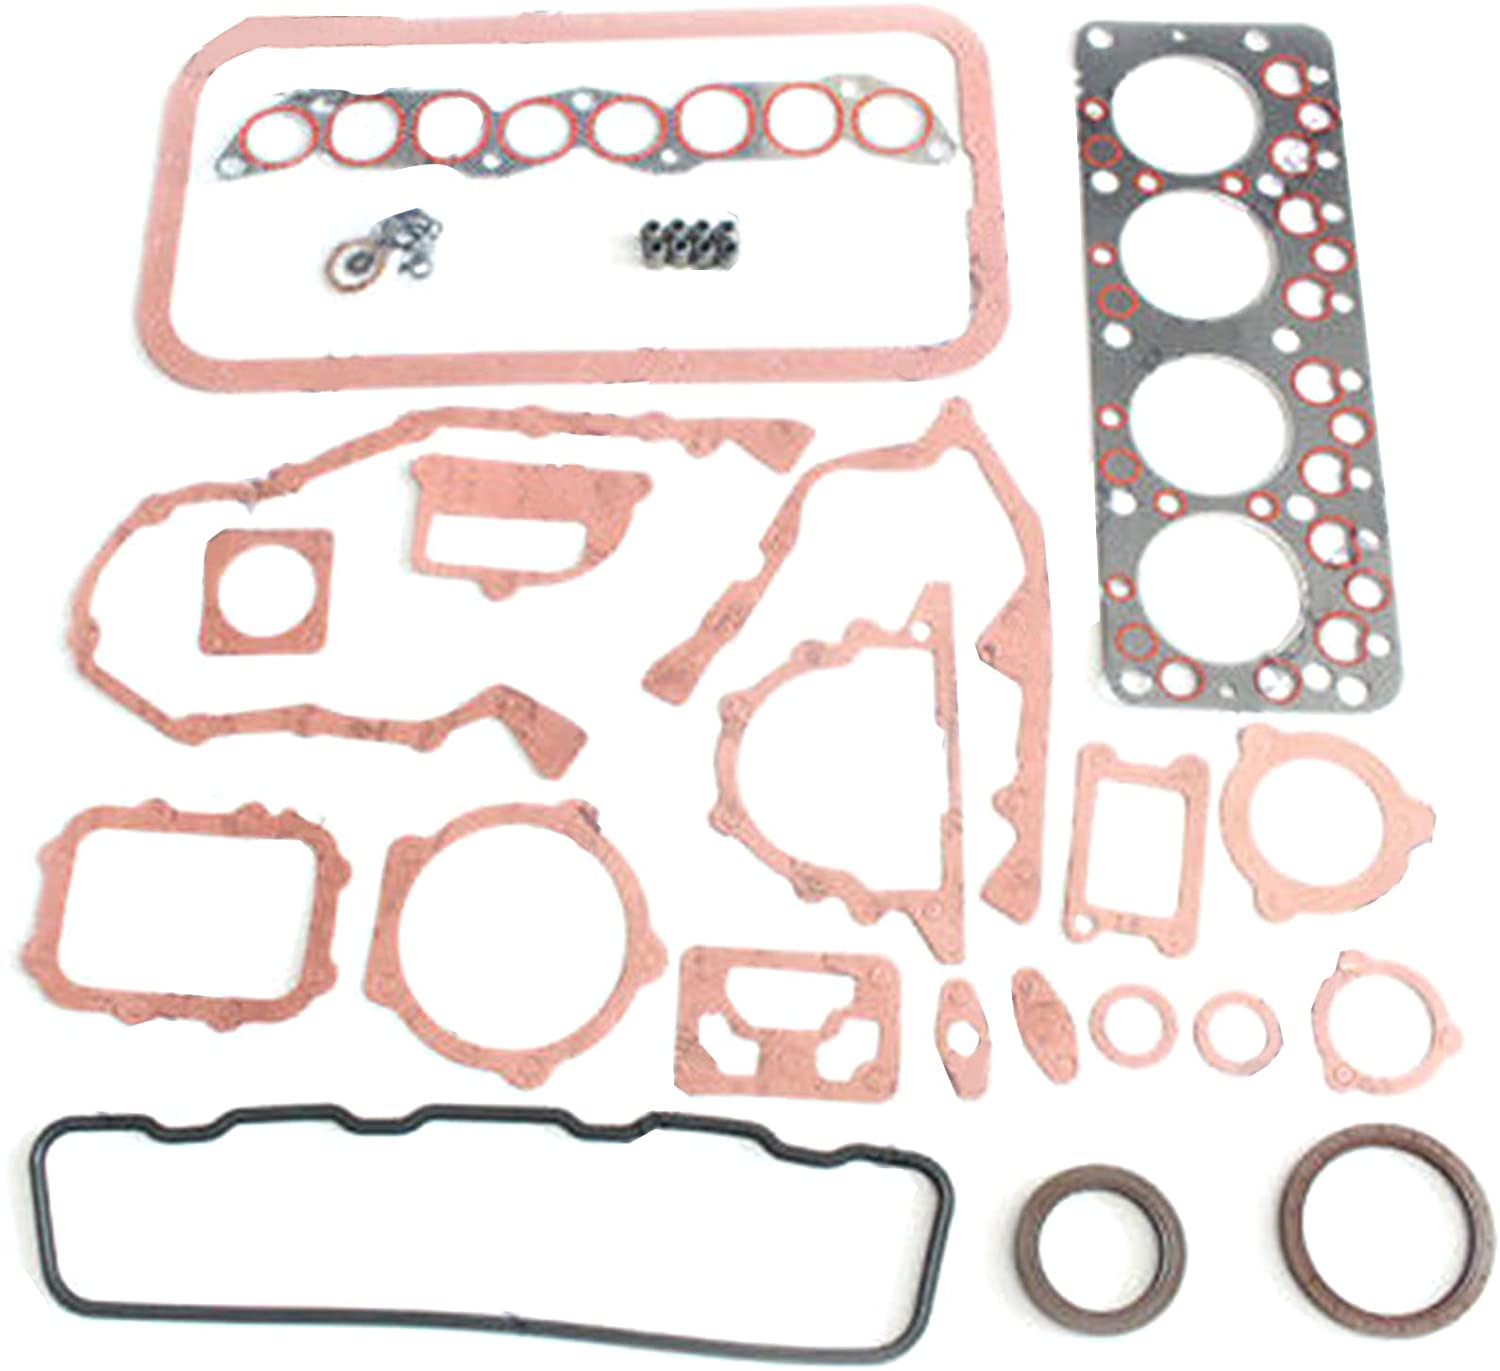 PANGOLIN SD22 SD-22 SD20 Engine Gasket Kit for Nissan Construction Machinery 10101-Y7525 Excavator Aftermarket Parts, 3 Month Warranty